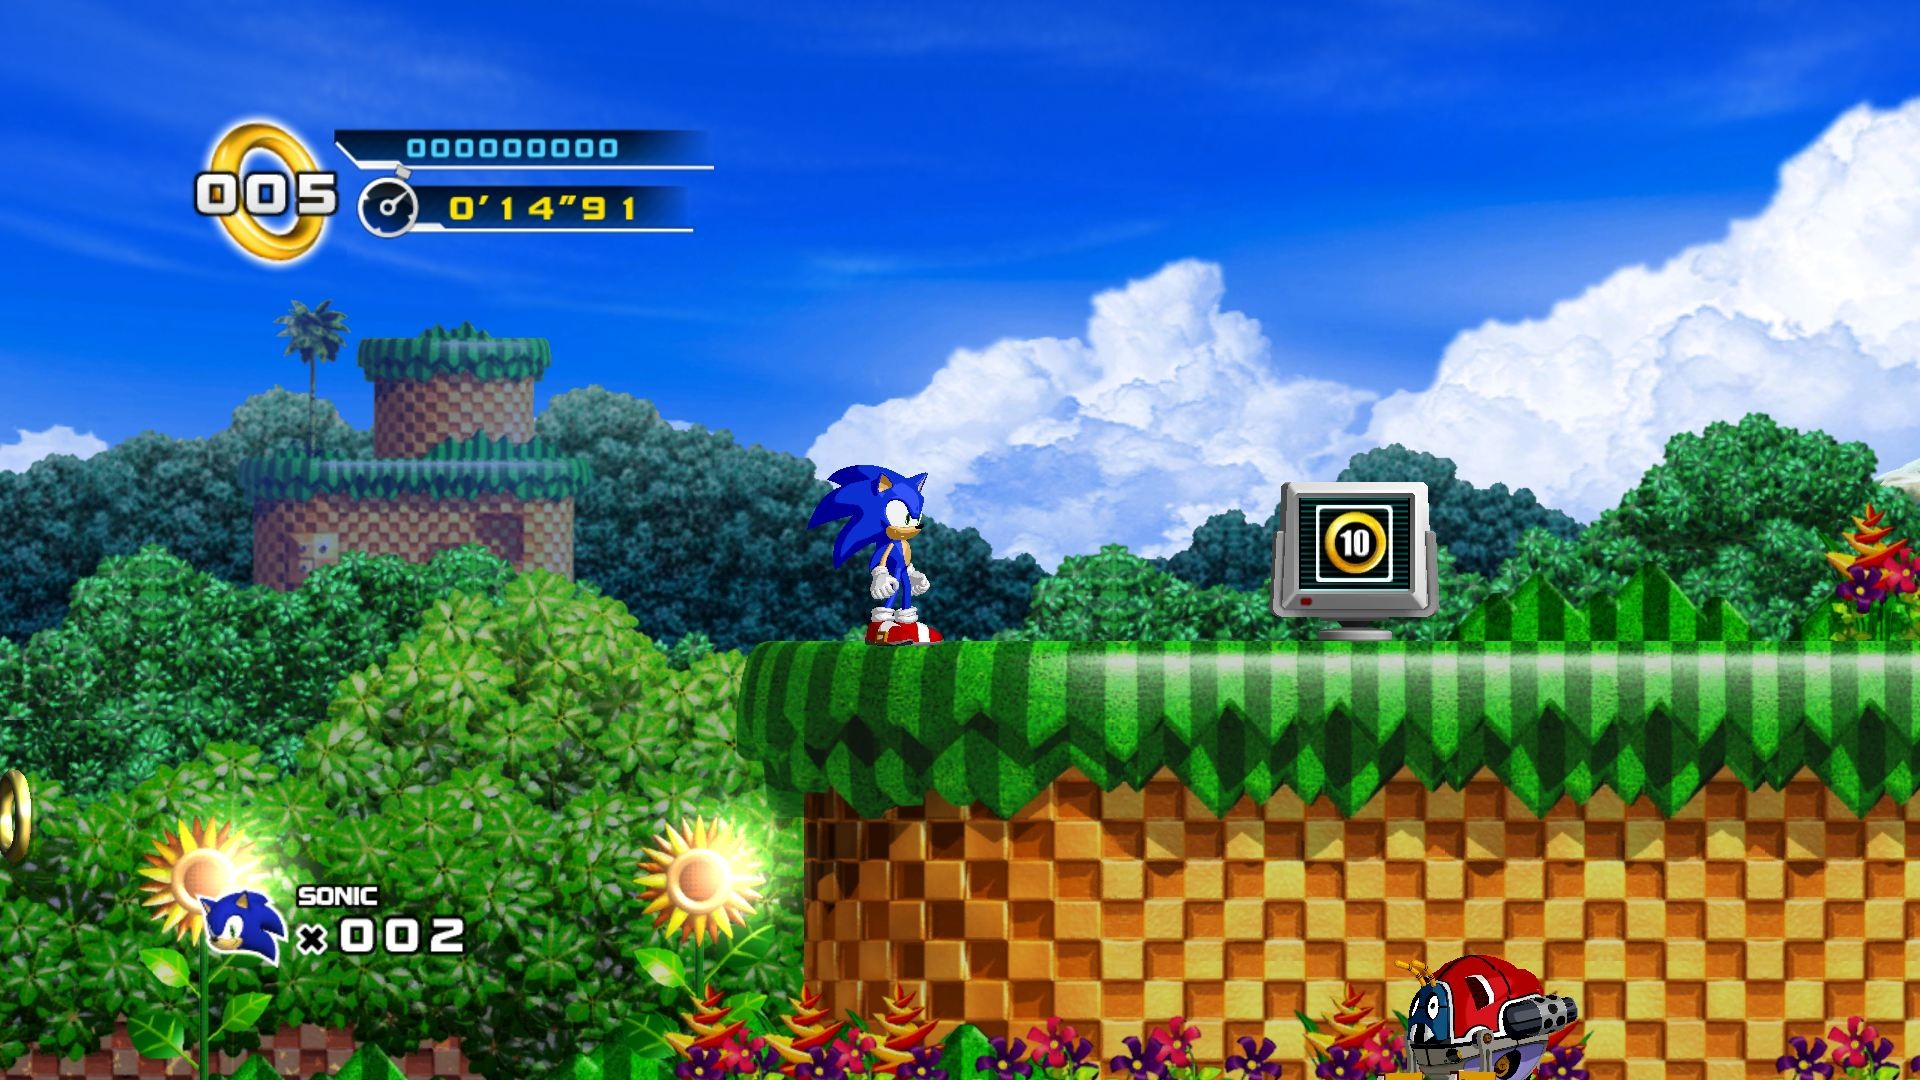 video game, sonic the hedgehog 4: episode i, sonic the hedgehog, sonic